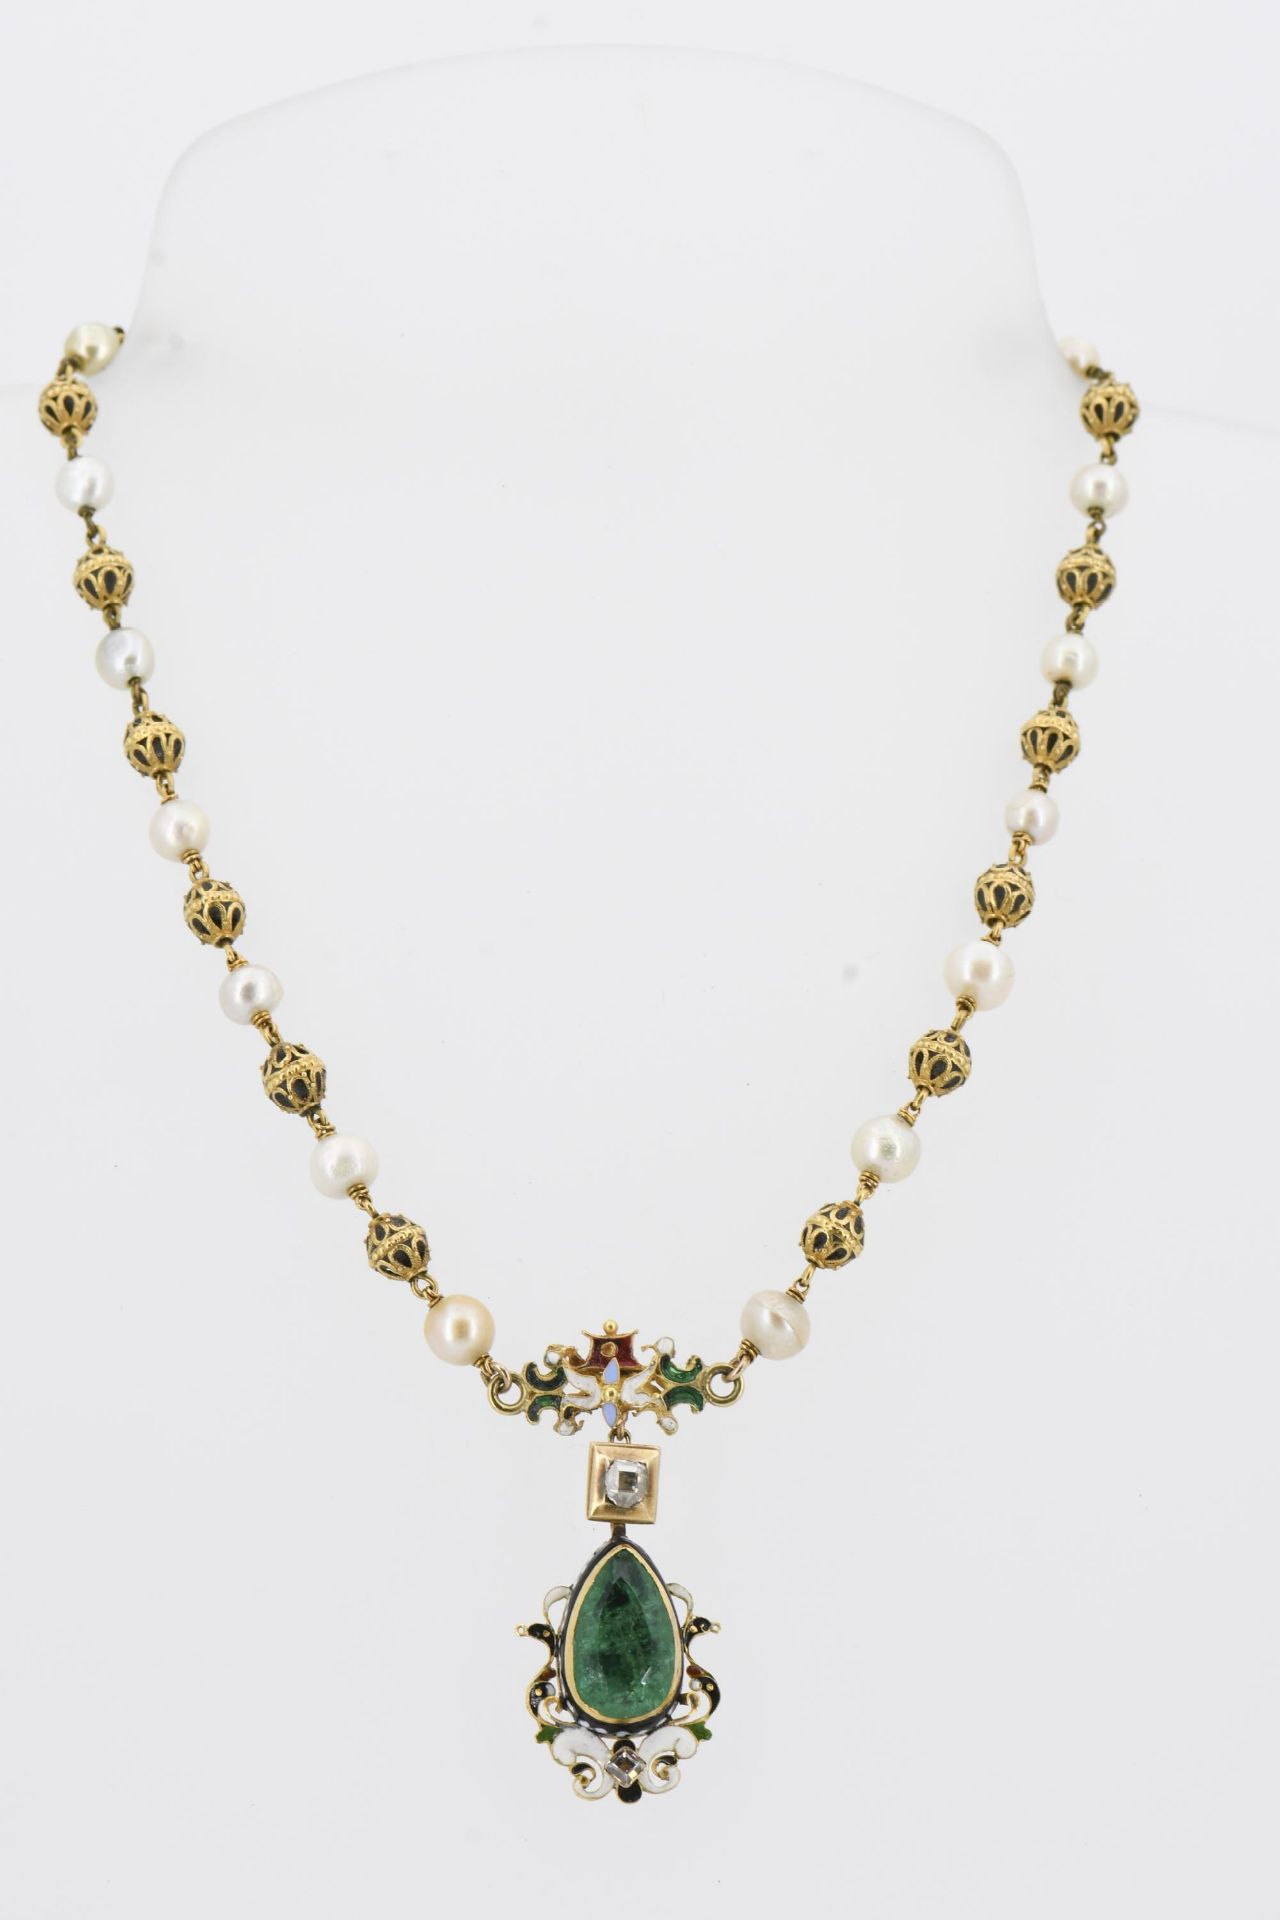 Historic-Emerald-Necklace - Image 4 of 7